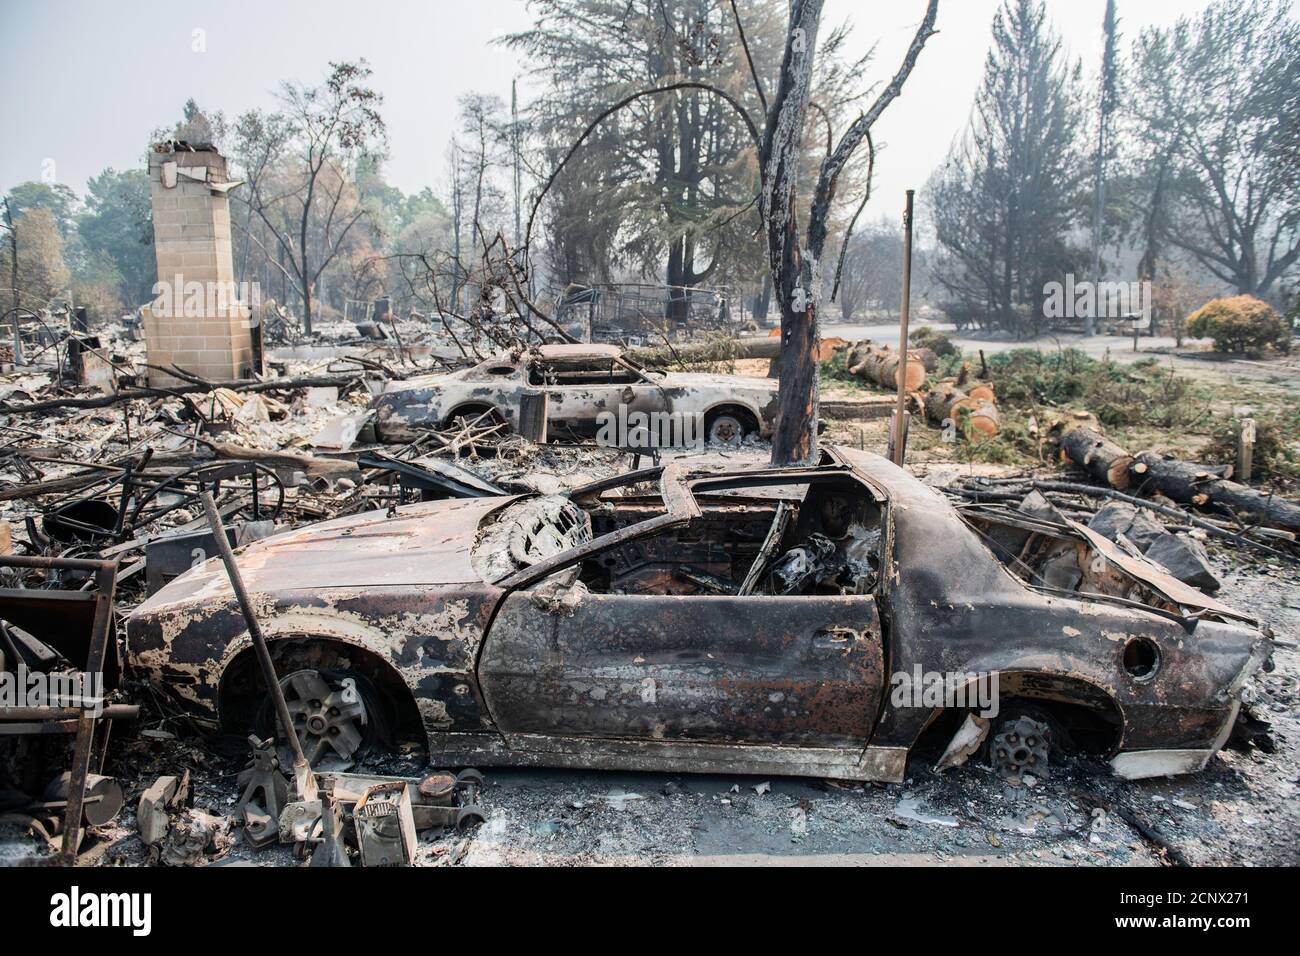 TALENT, ORE - SEPTEMBER 18, 2020: A general view of burned out vehicles amid the aftermath of the Almeda Fire. The town of Talent, Oregon, showing the burned out homes, cars and rubble left behind. In Talent, about 20 miles north of the California border, homes were charred beyond recognition. Across the western US, at least 87 wildfires are burning, according to the National Interagency Fire Center. They've torched more than 4.7 million acres -- more than six times the area of Rhode Island. Credit: Chris Tuite/imageSPACE Stock Photo